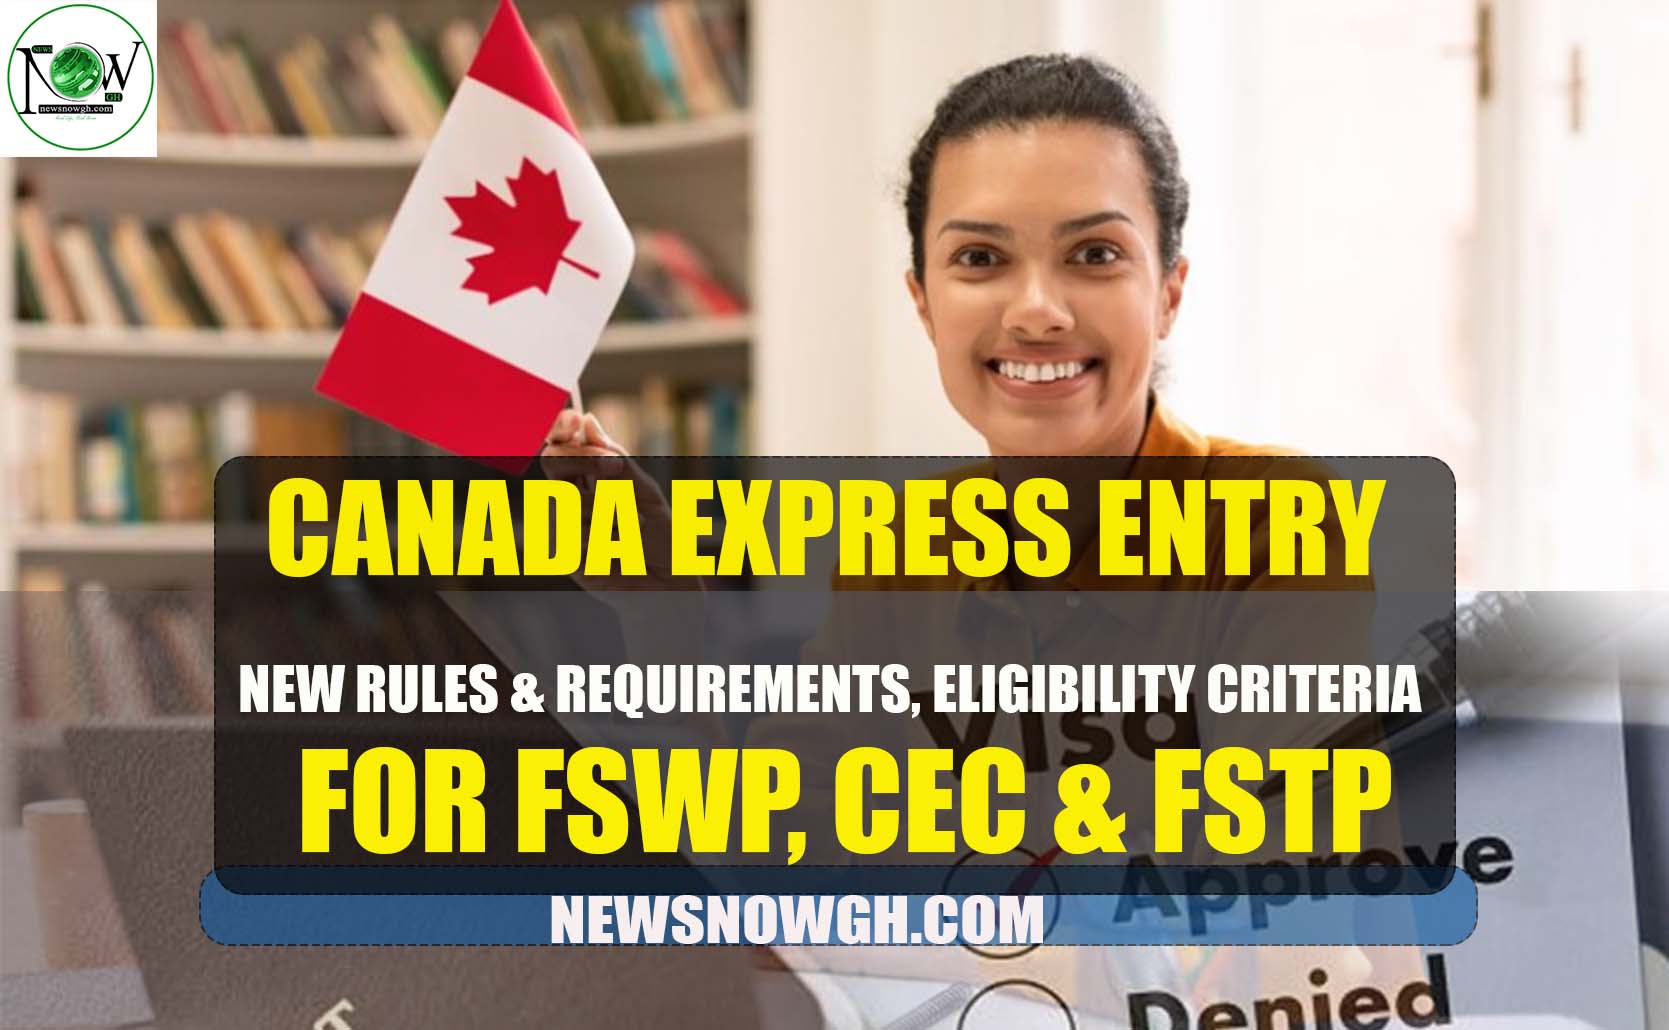 Canada Express Entry: New Rules & Requirements, Eligibility Criteria for FSWP, CEC & FSTP